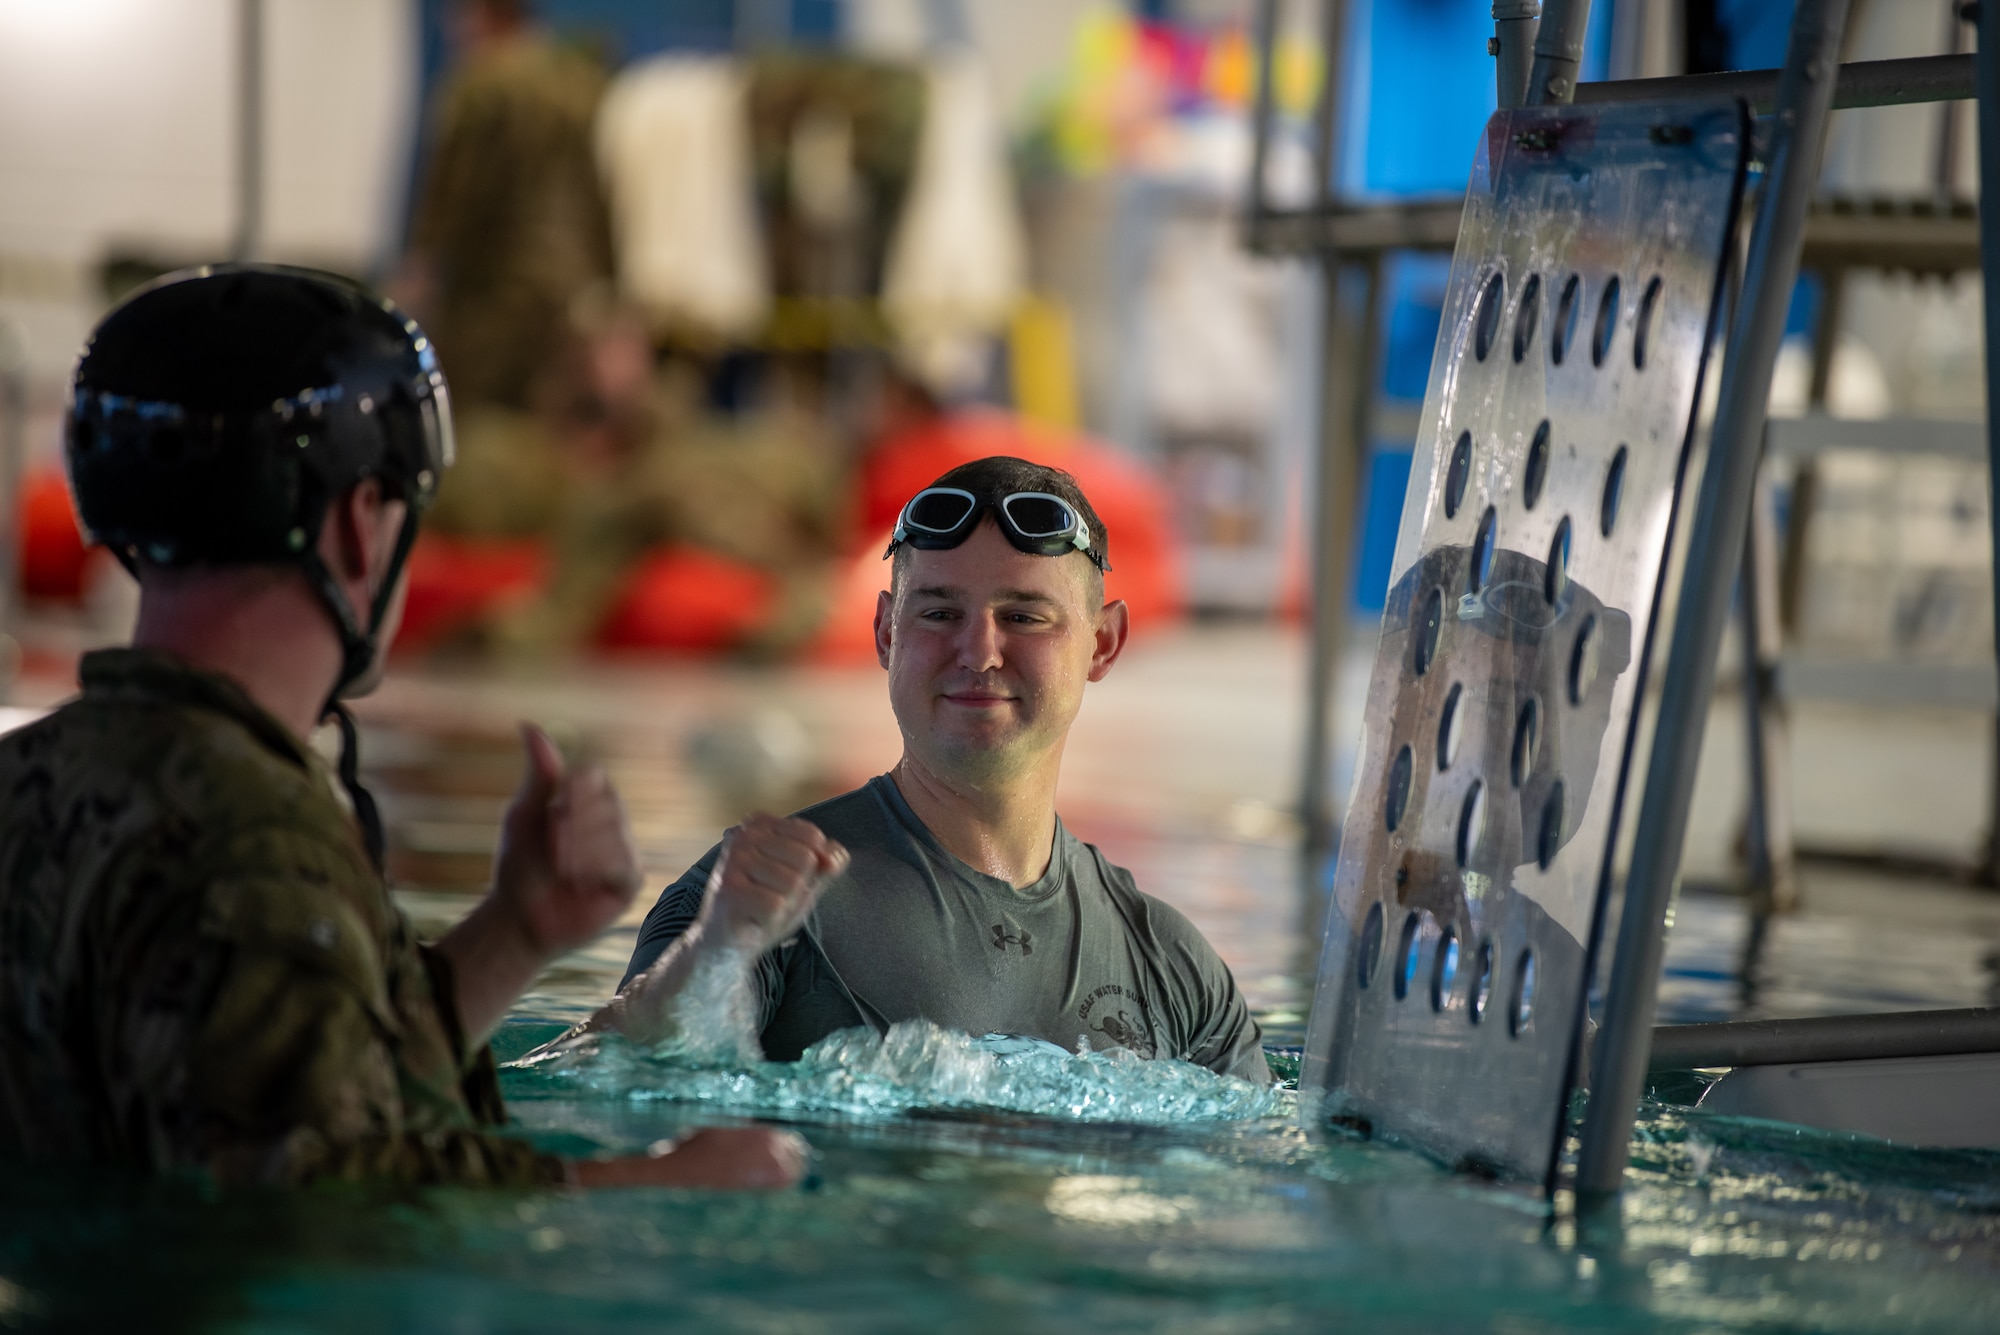 A instructor wearing a grey shirt and swimming goggles on his forehead fist bumps a soldier wearing a black helmet. Both of them are in a pool and treading water by a metal structure.